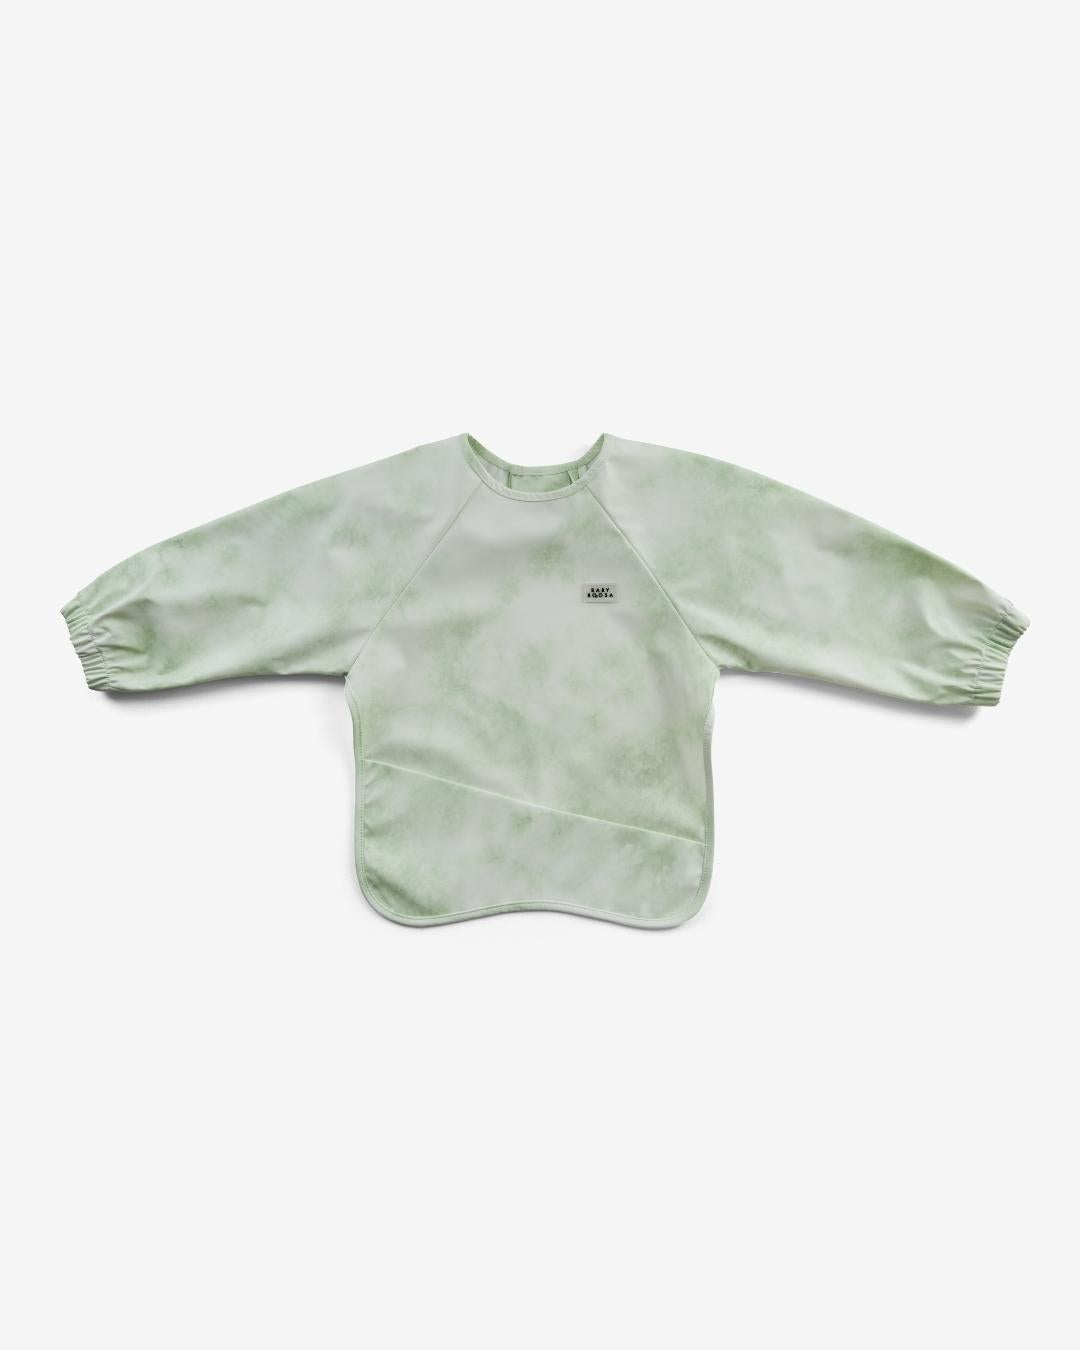 Comfort Fit Coverall Bib | Adjustable Neck &amp; Arms | Easy Clean | No-mess | Waterproof | Eco Recycled (Sage Tie Dye Print)